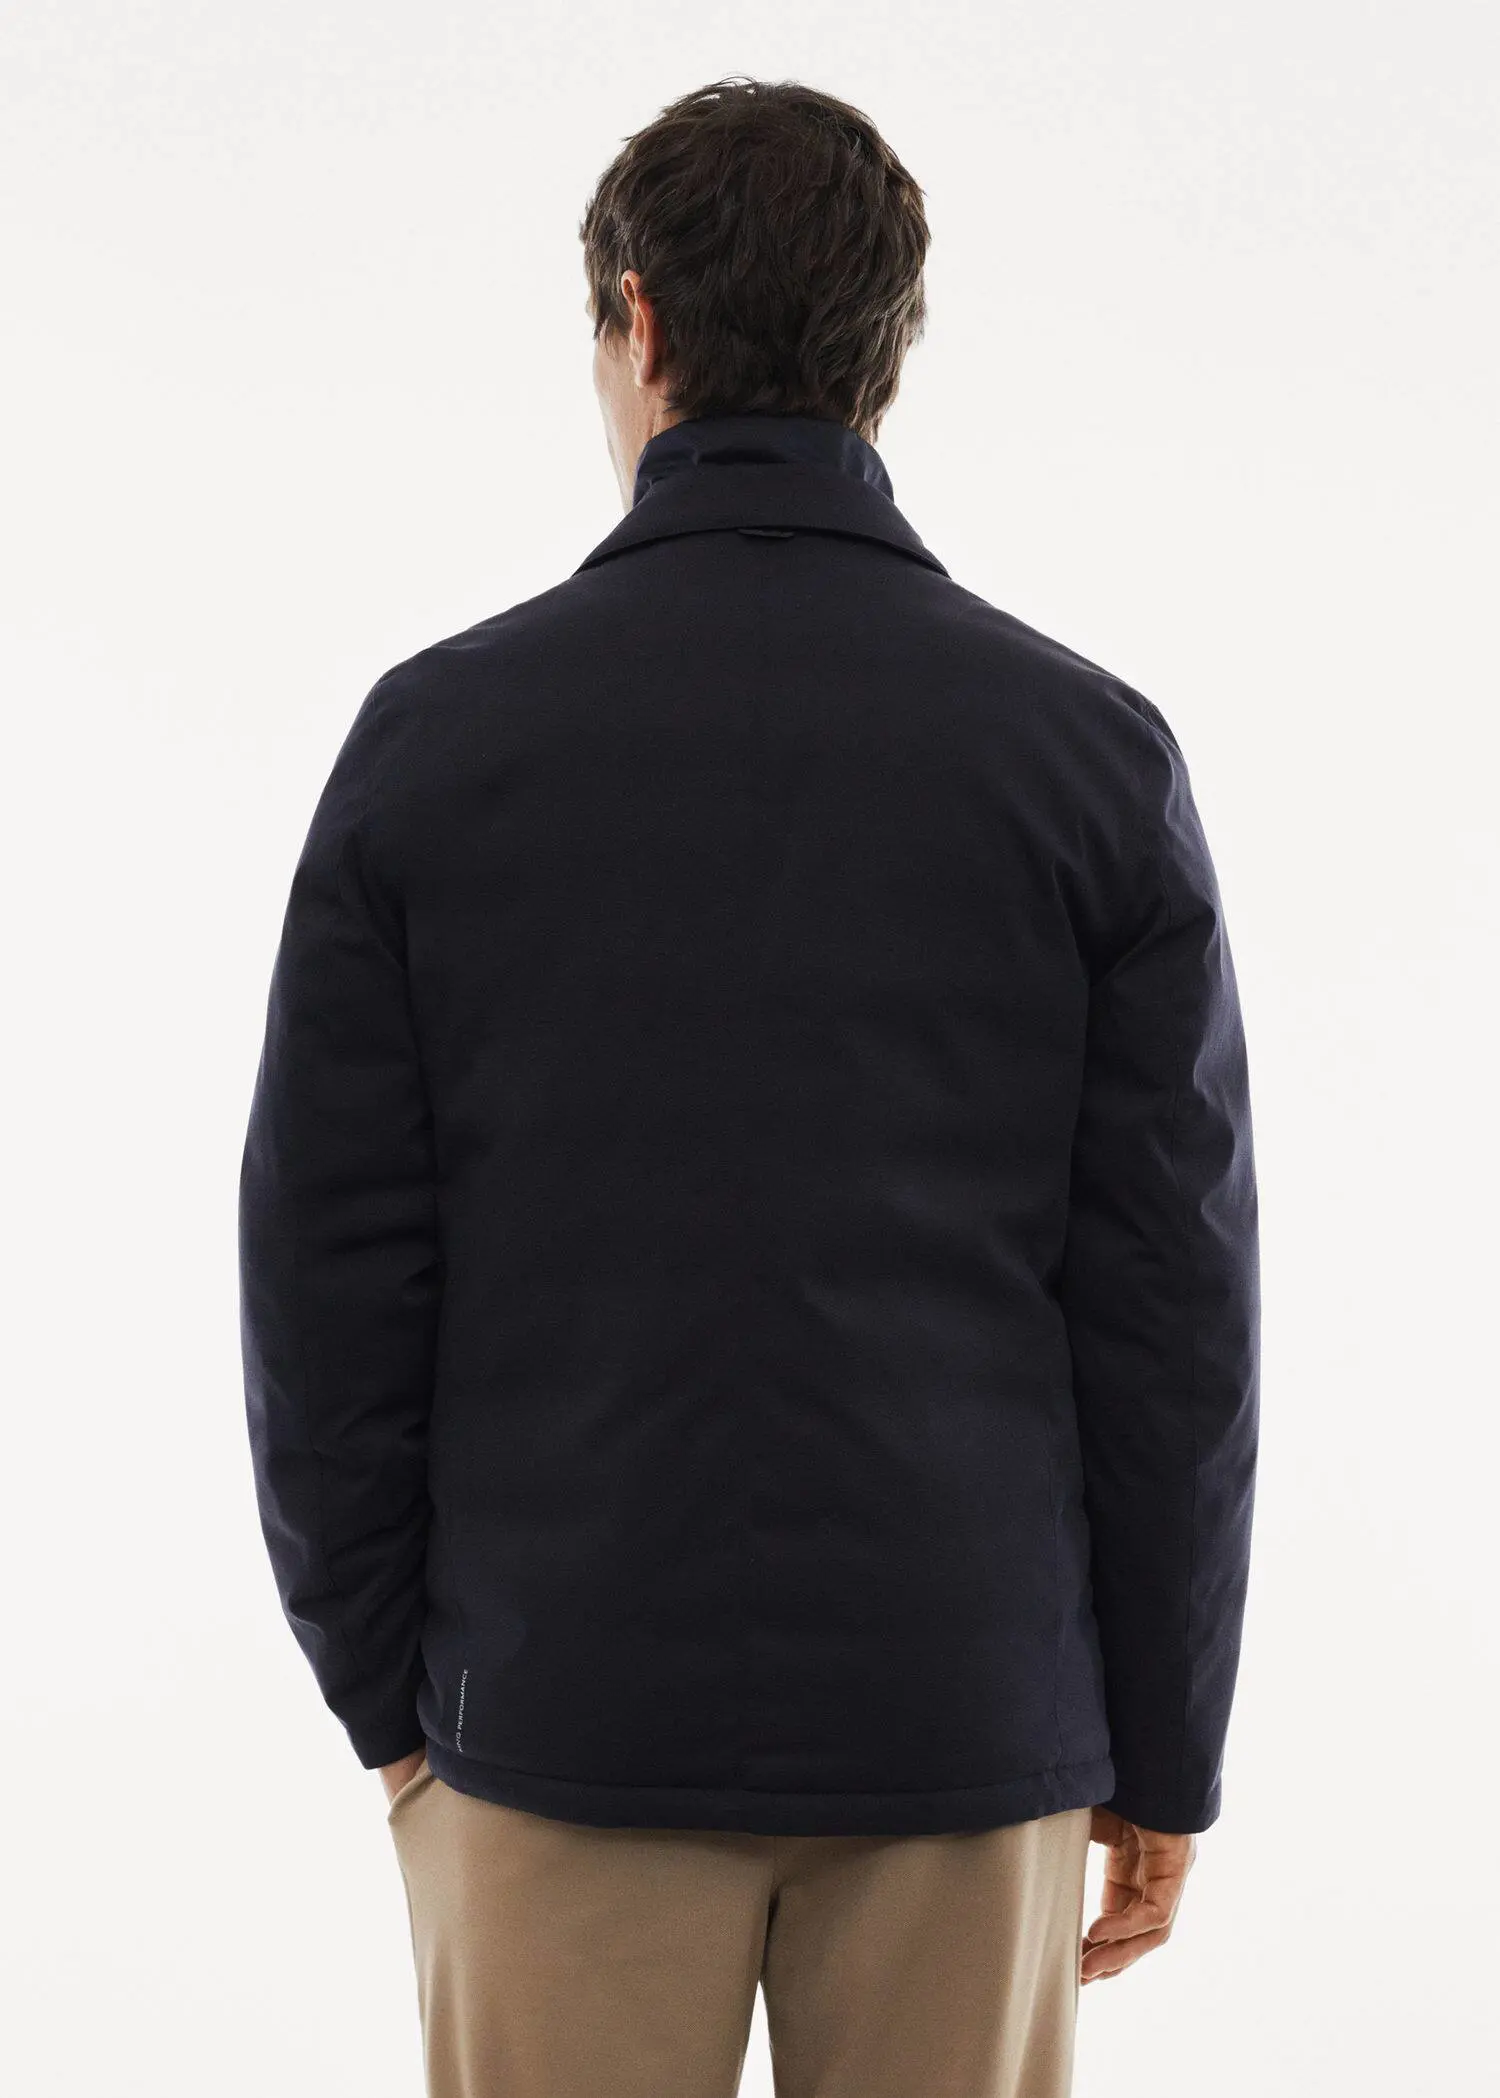 Mango Water-repellent jacket with feather filling. 3